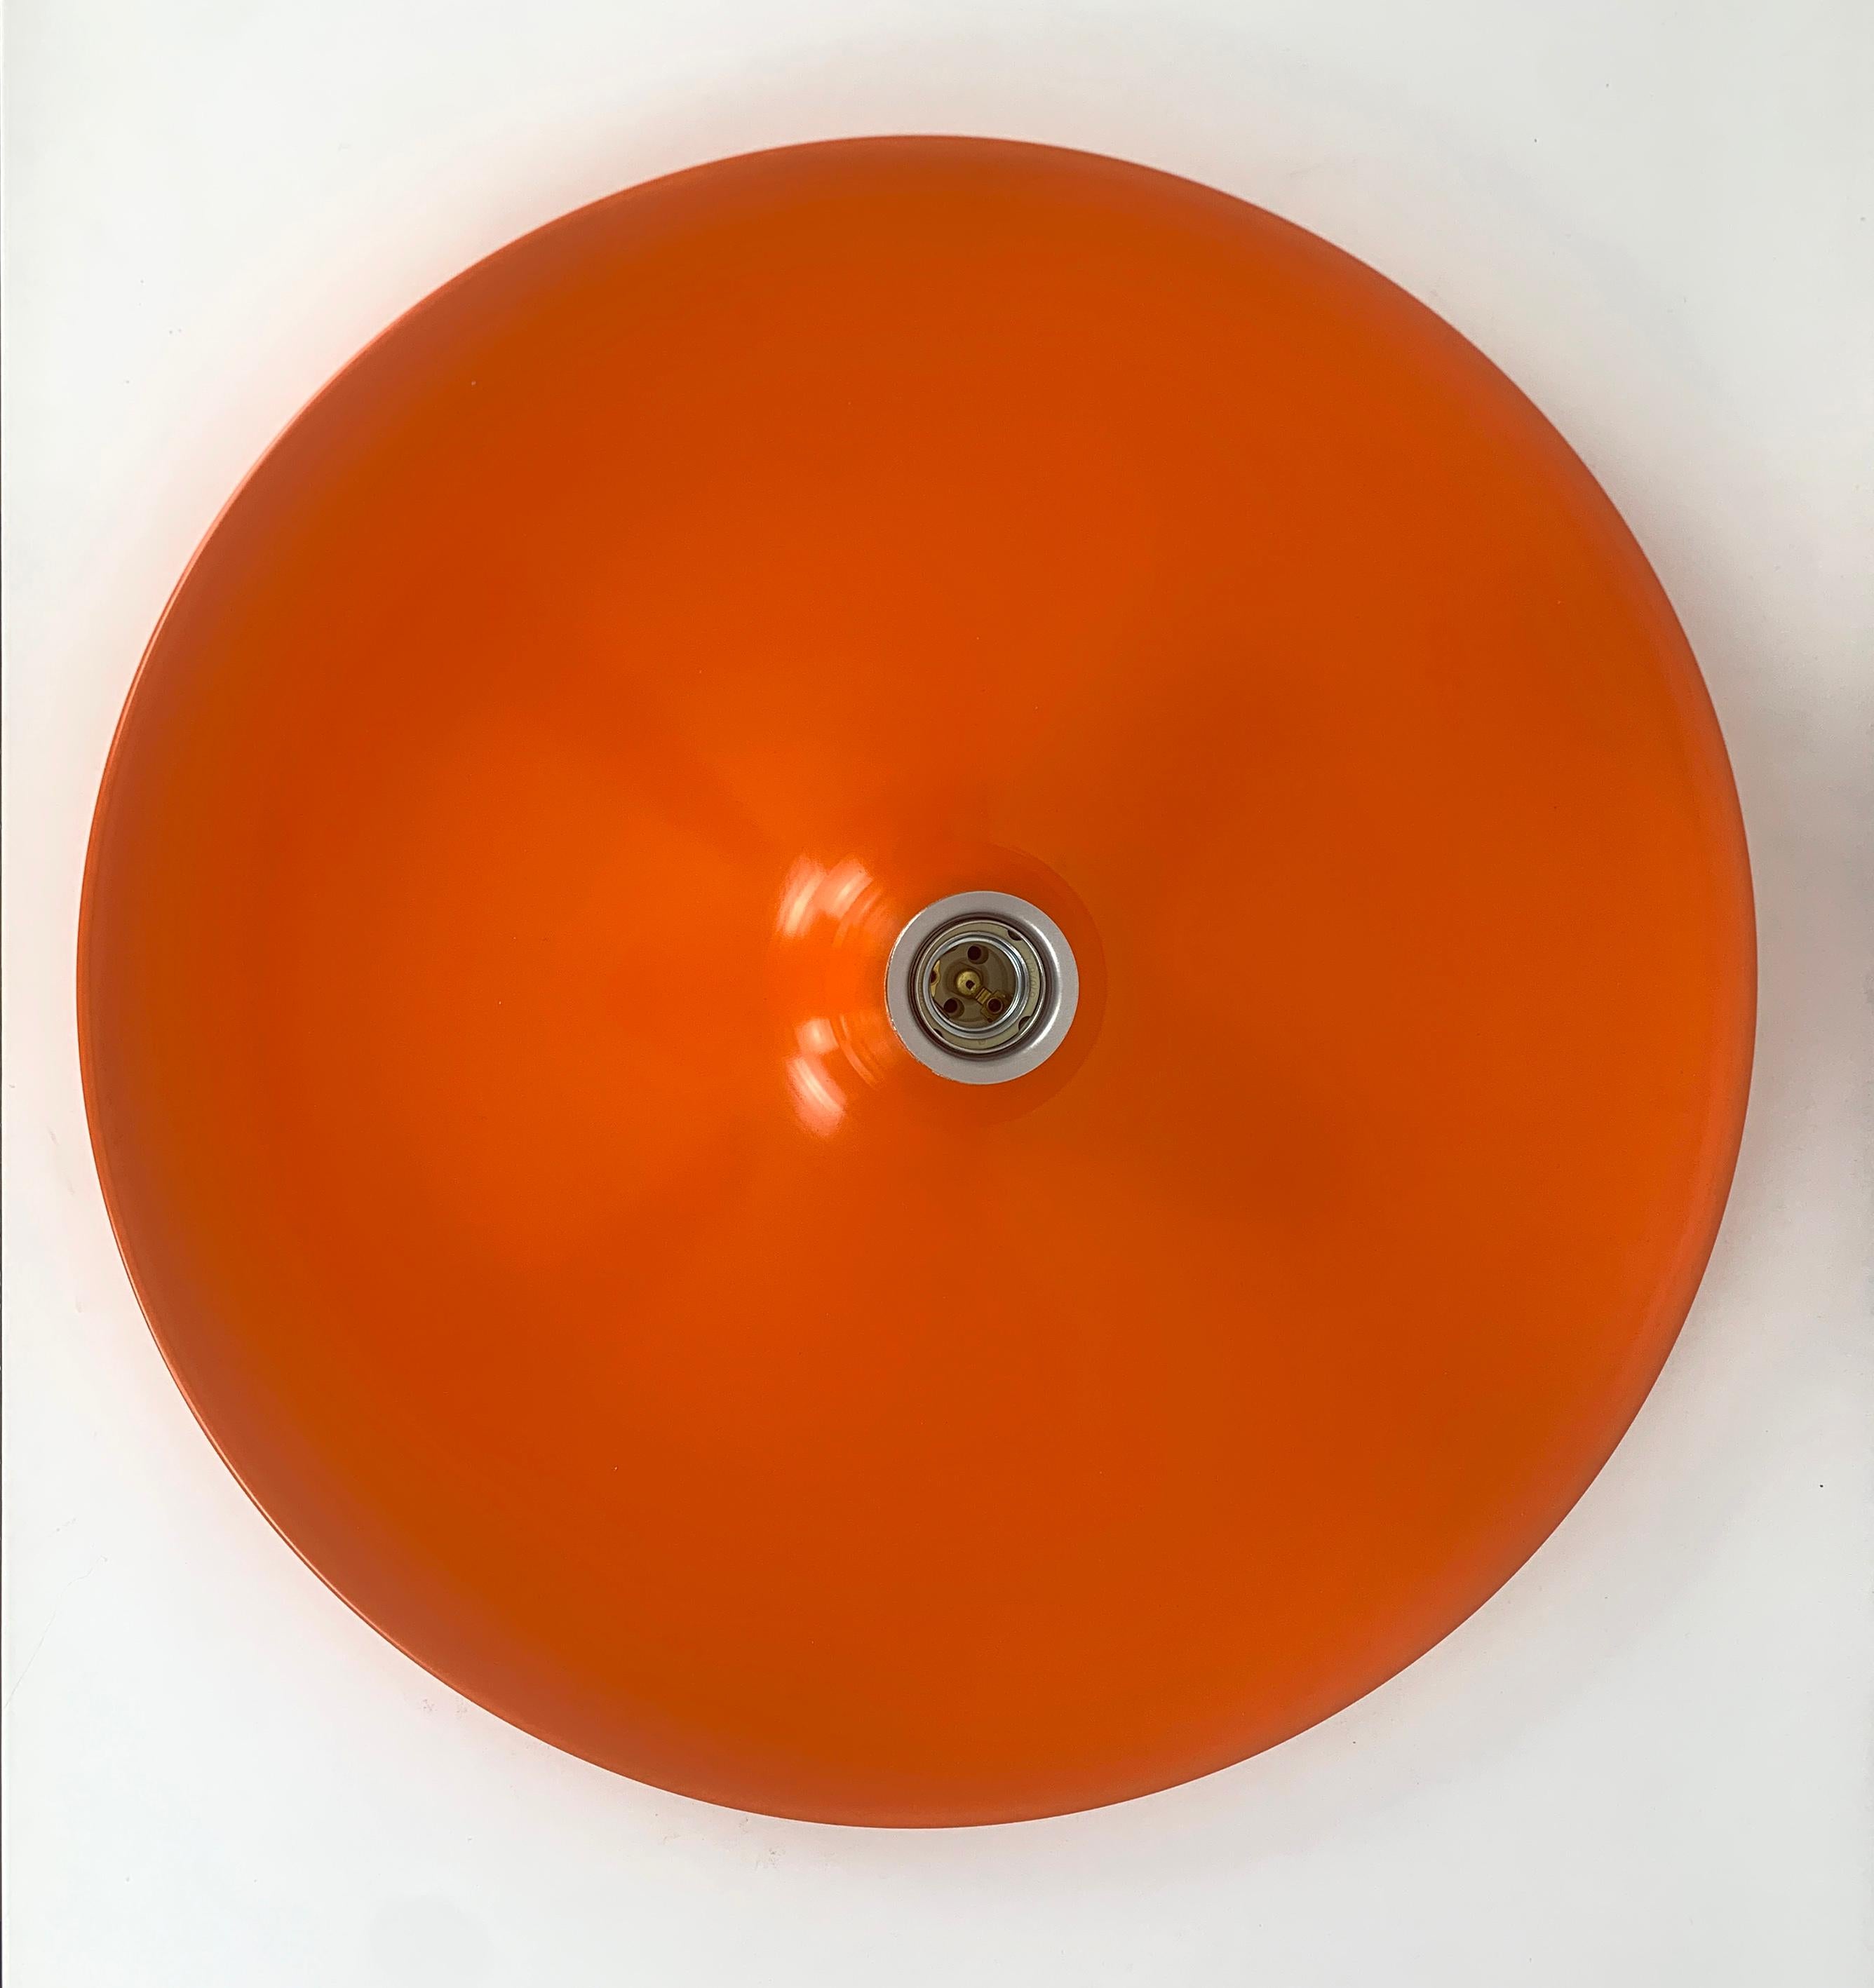 Large Charlotte Perriand Space Age Flush Sconce Disc Wall Light, Germany, 1960s For Sale 6